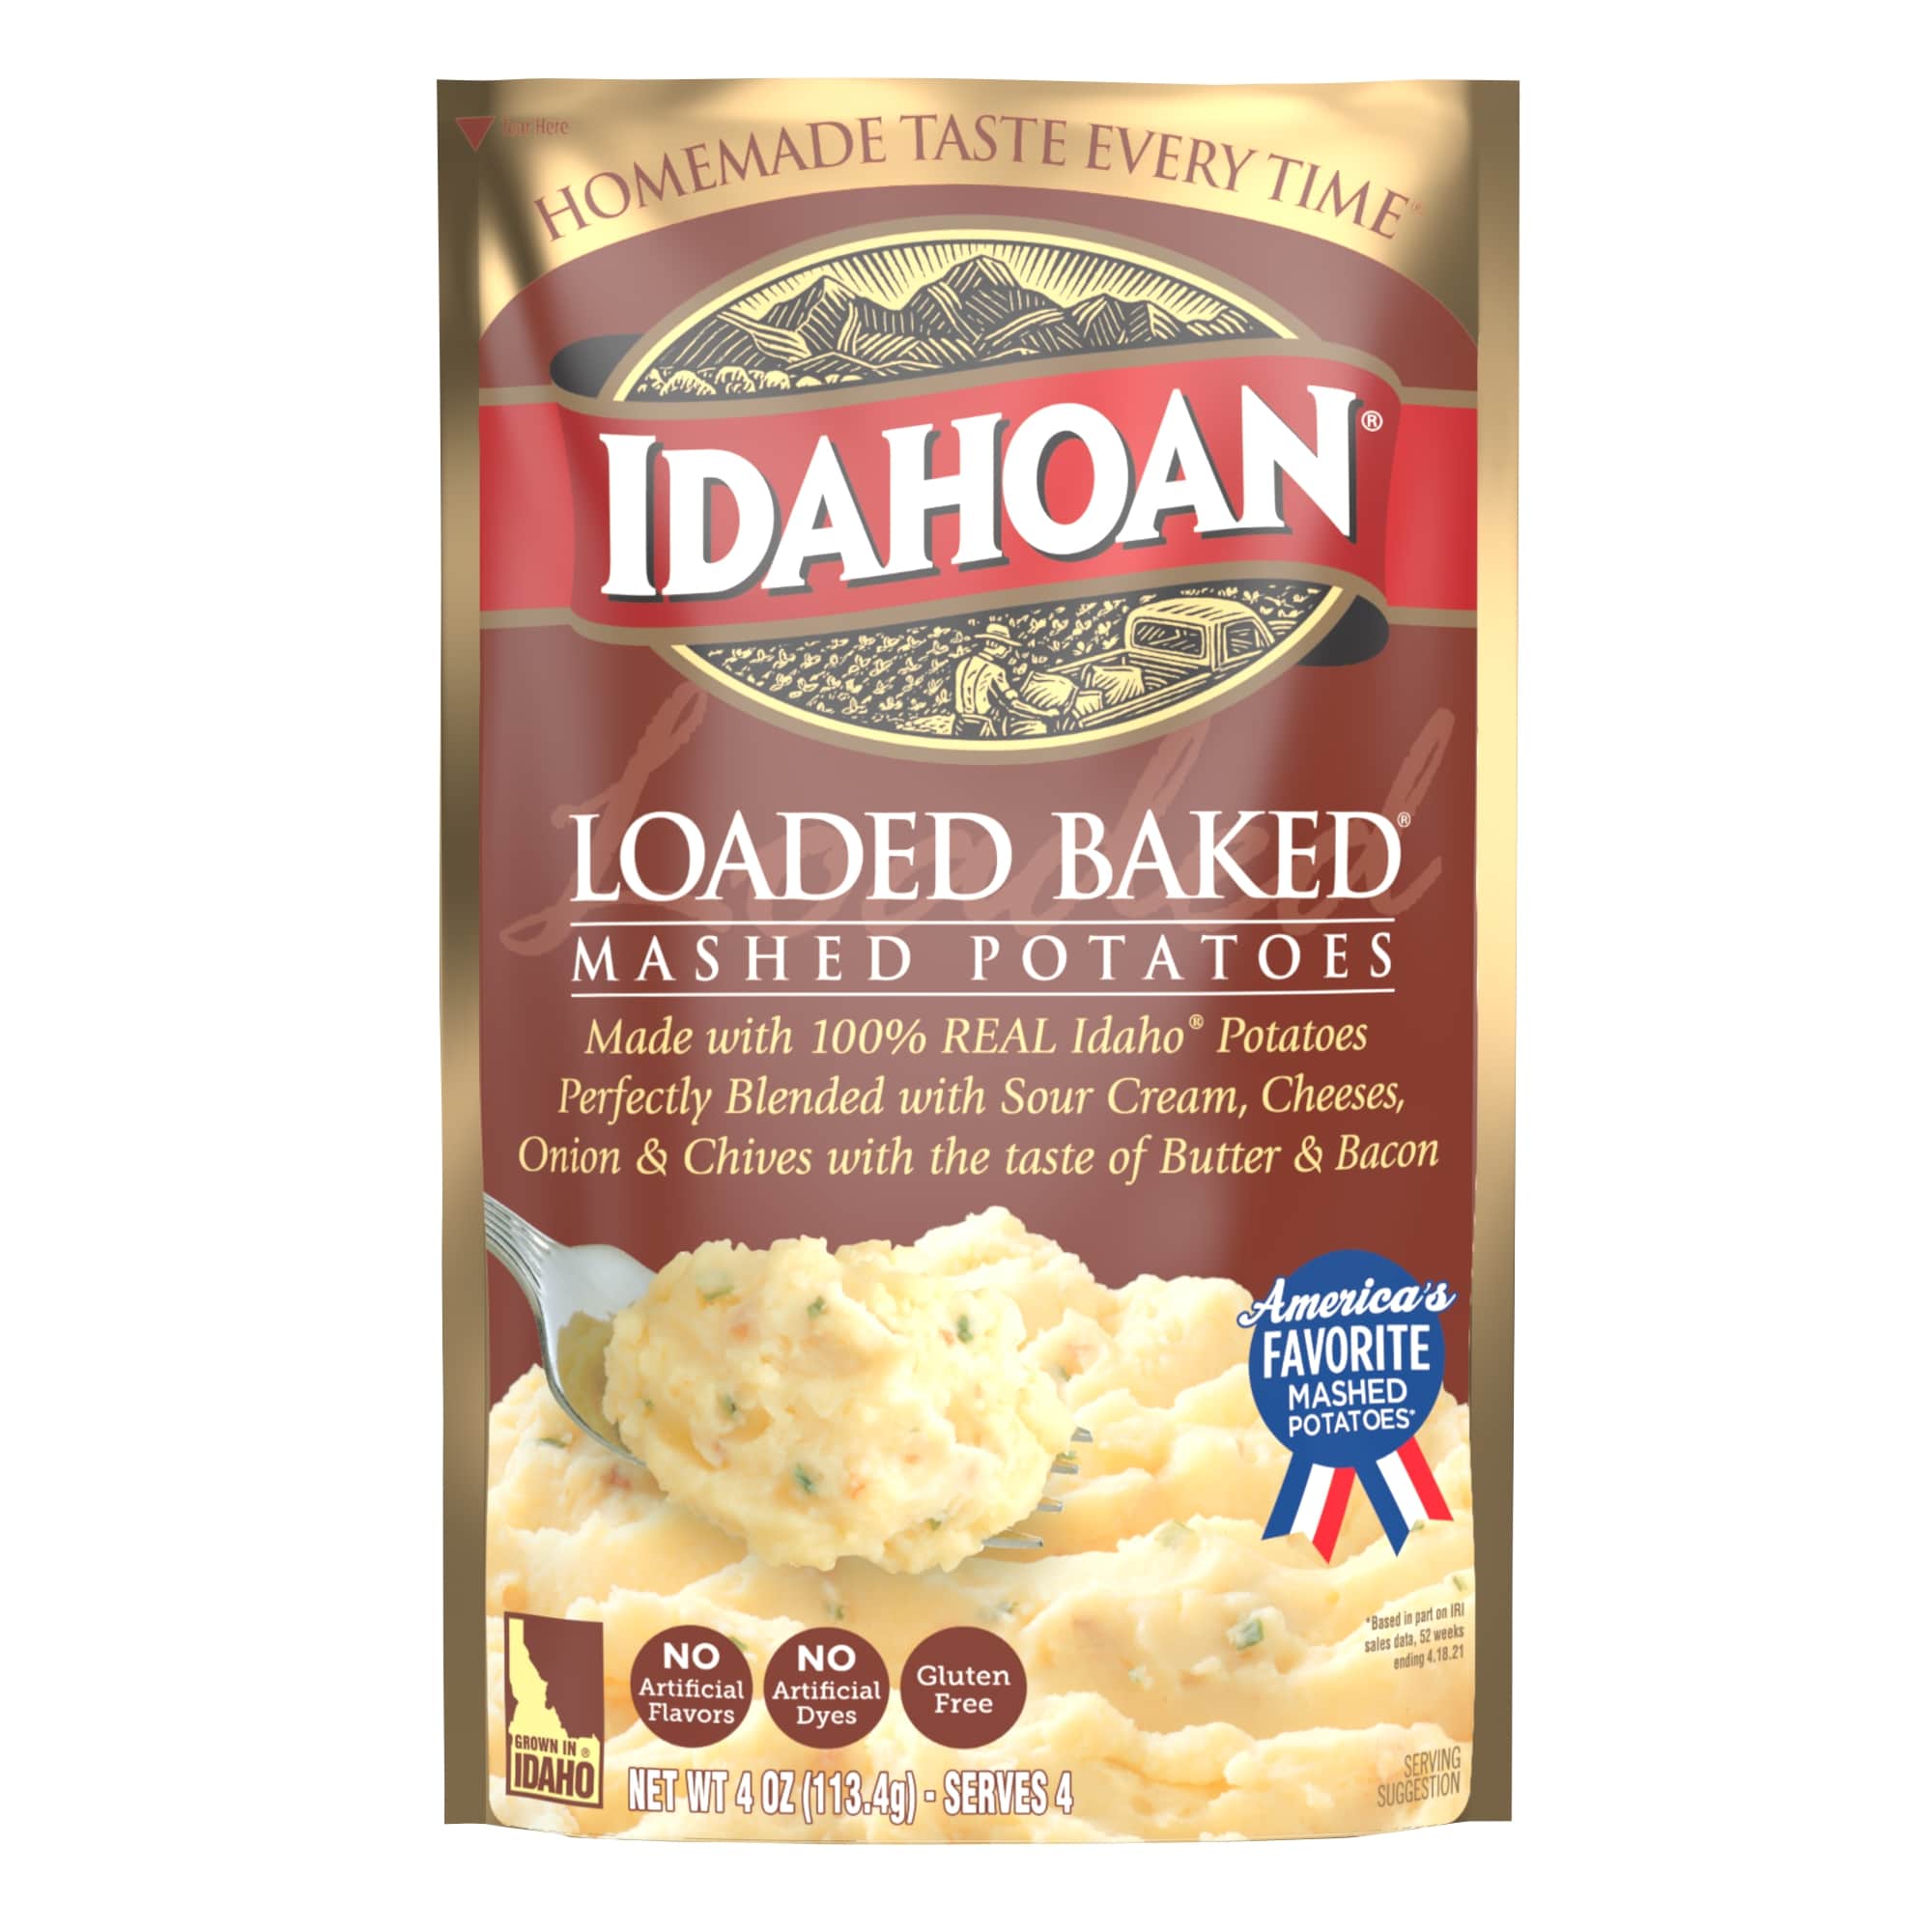 Idahoan Loaded Baked Mashed Potatoes, 4 Ounce Pouch -- 12 per case.